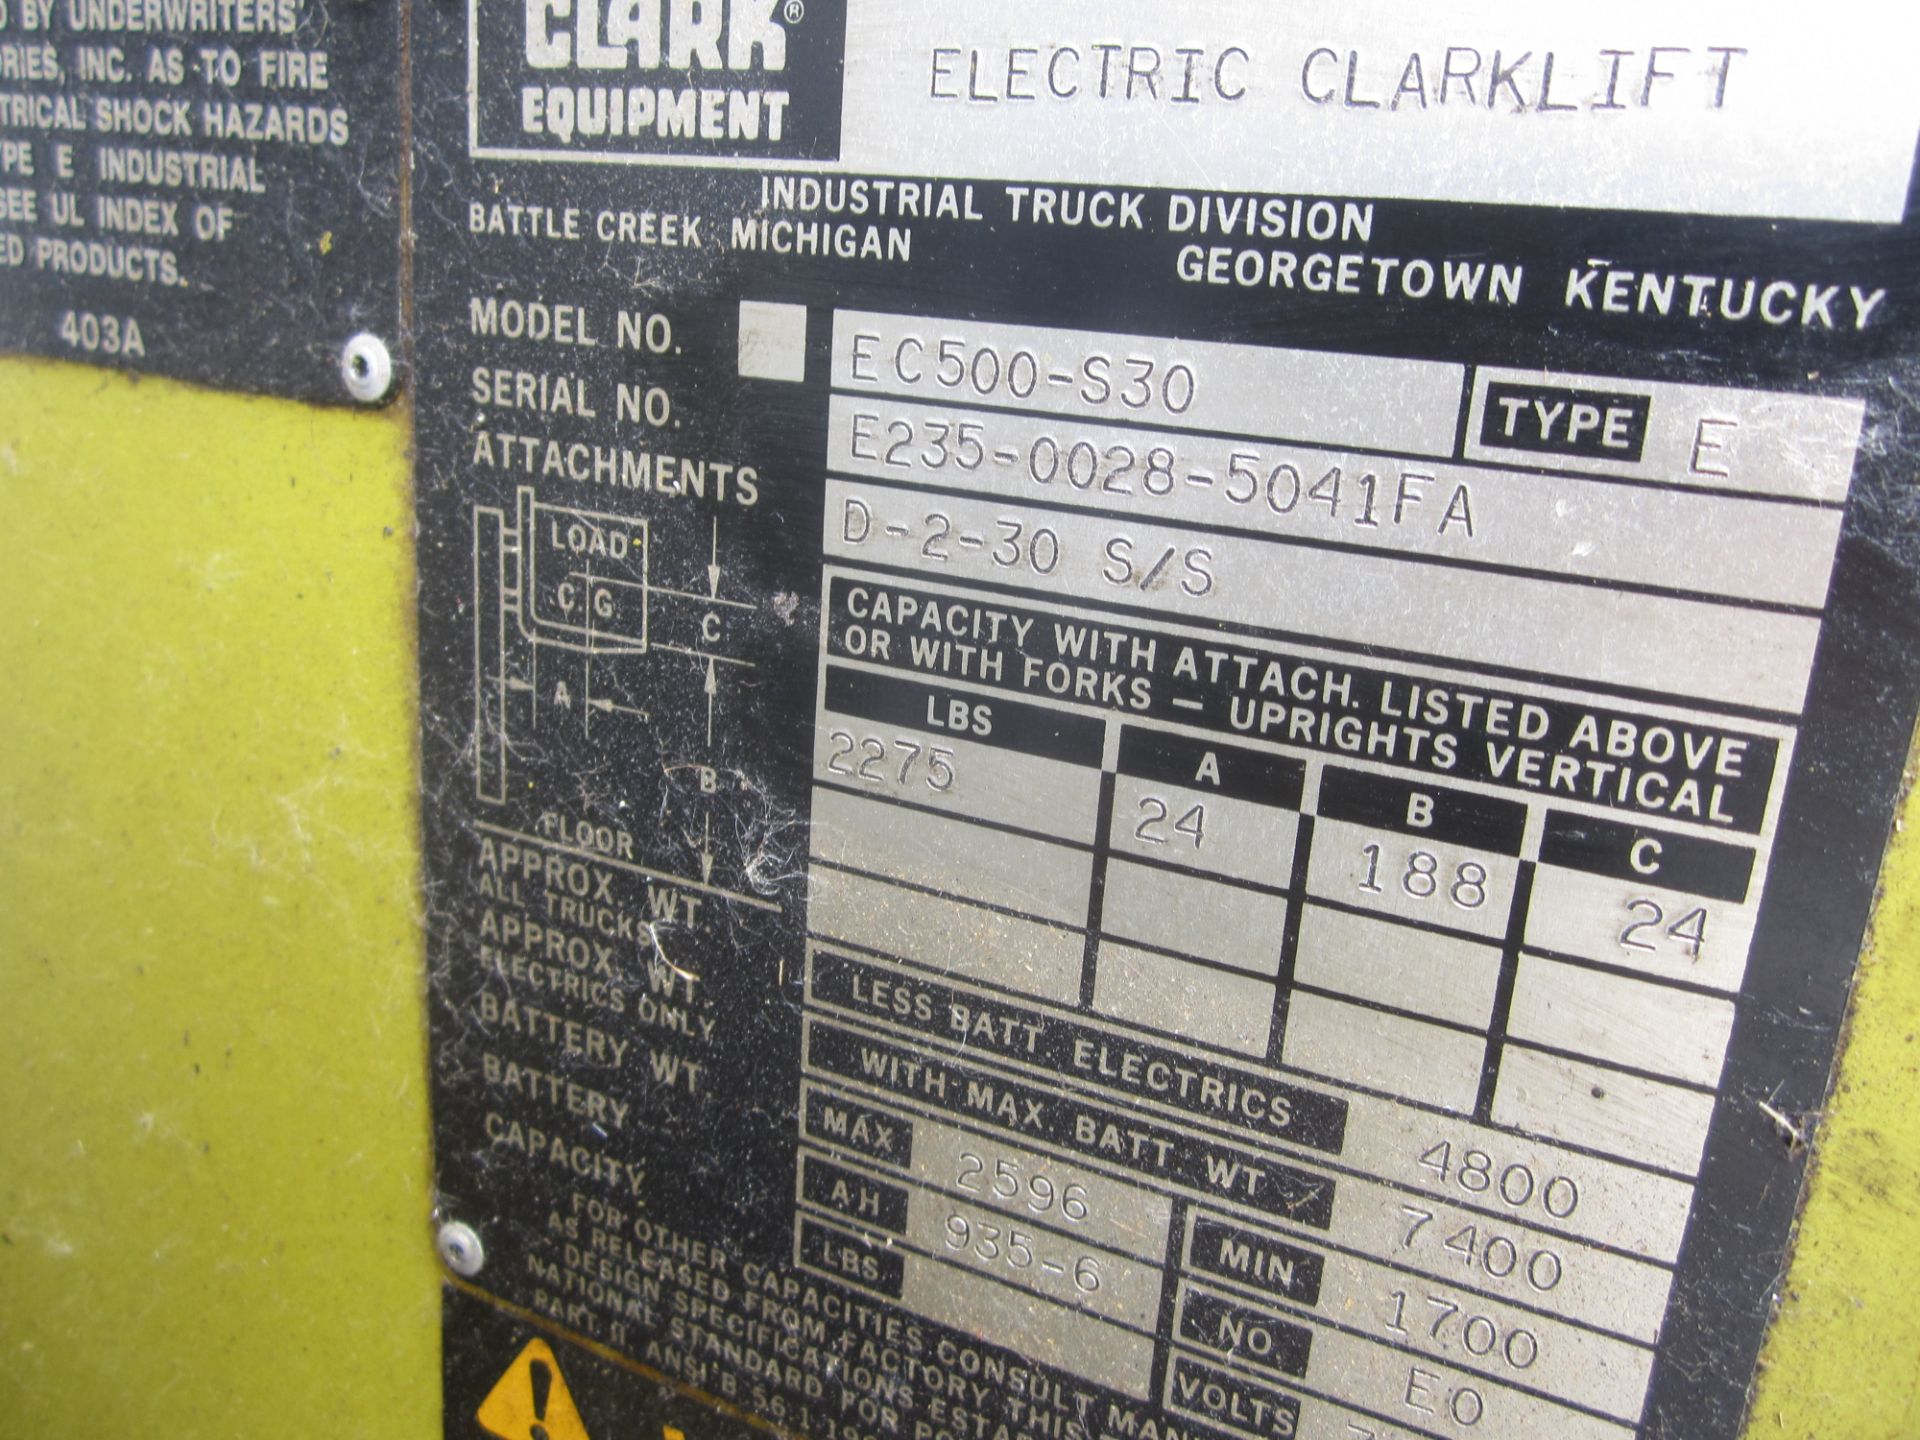 Clark Model EC500-S30 Electric Forklift, s/n E235-0028-5041FA, 2,275 Lb. Capacity, 3-Stage Mast, - Image 2 of 4